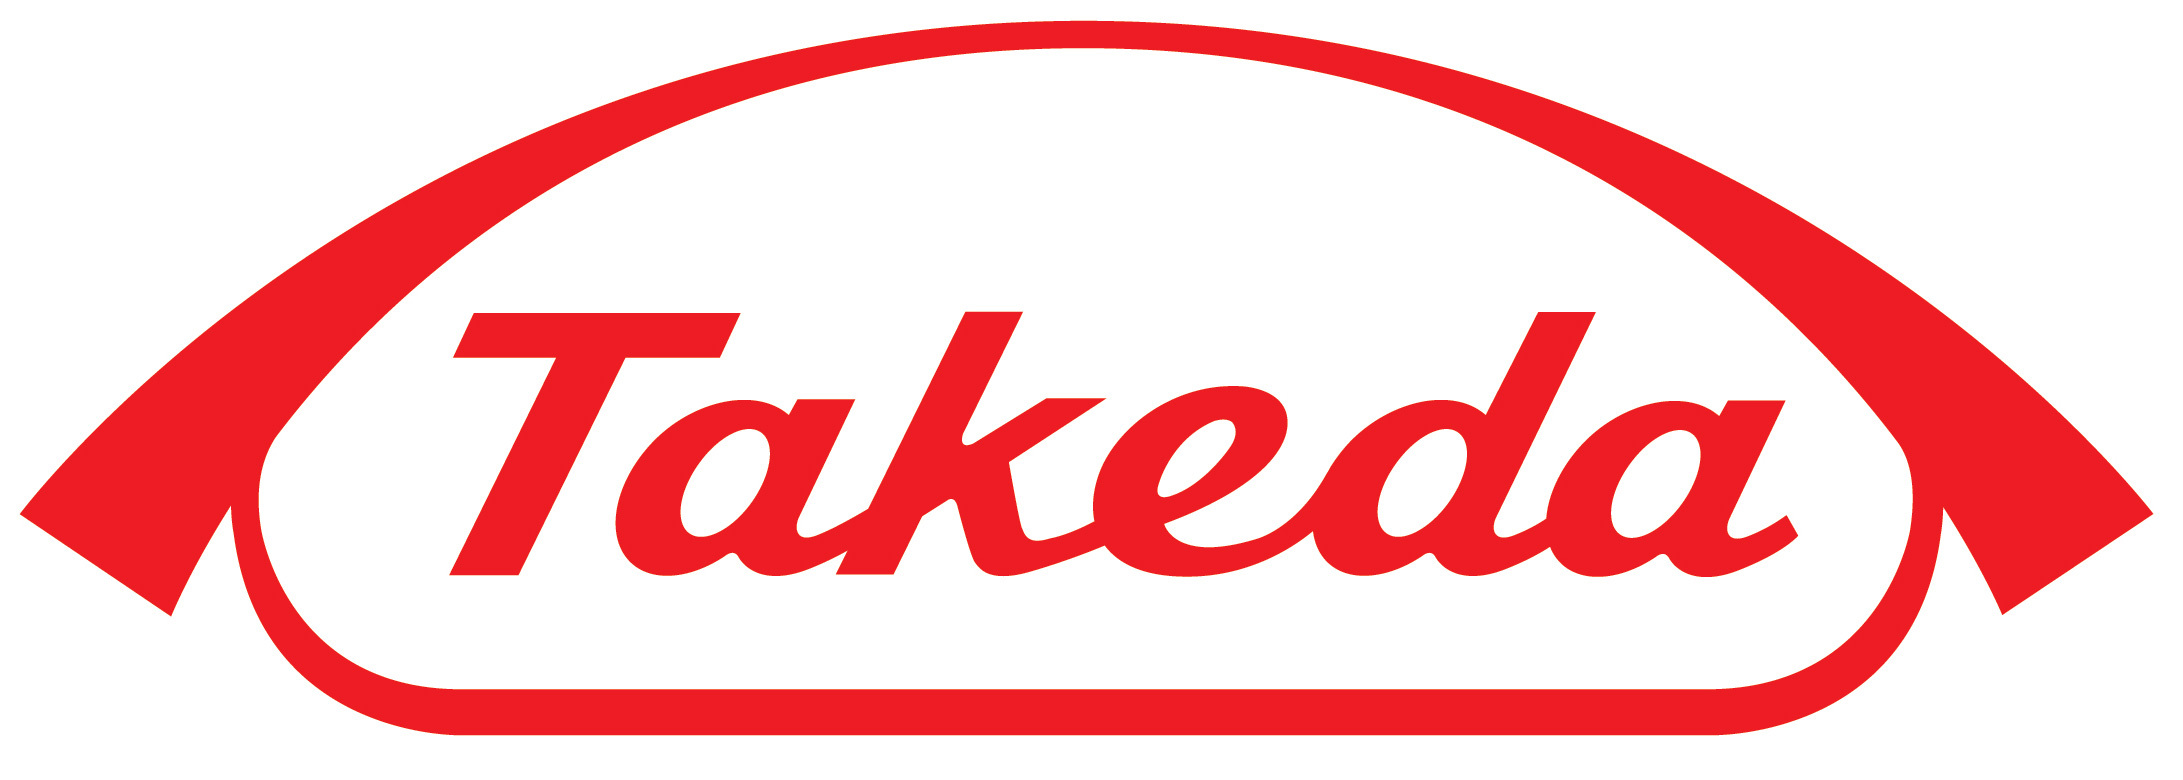 Takeda To Commercialize Next Generation Hunter Syndrome Therapy Through Collaboration With Jcr Pharmaceuticals Business Wire